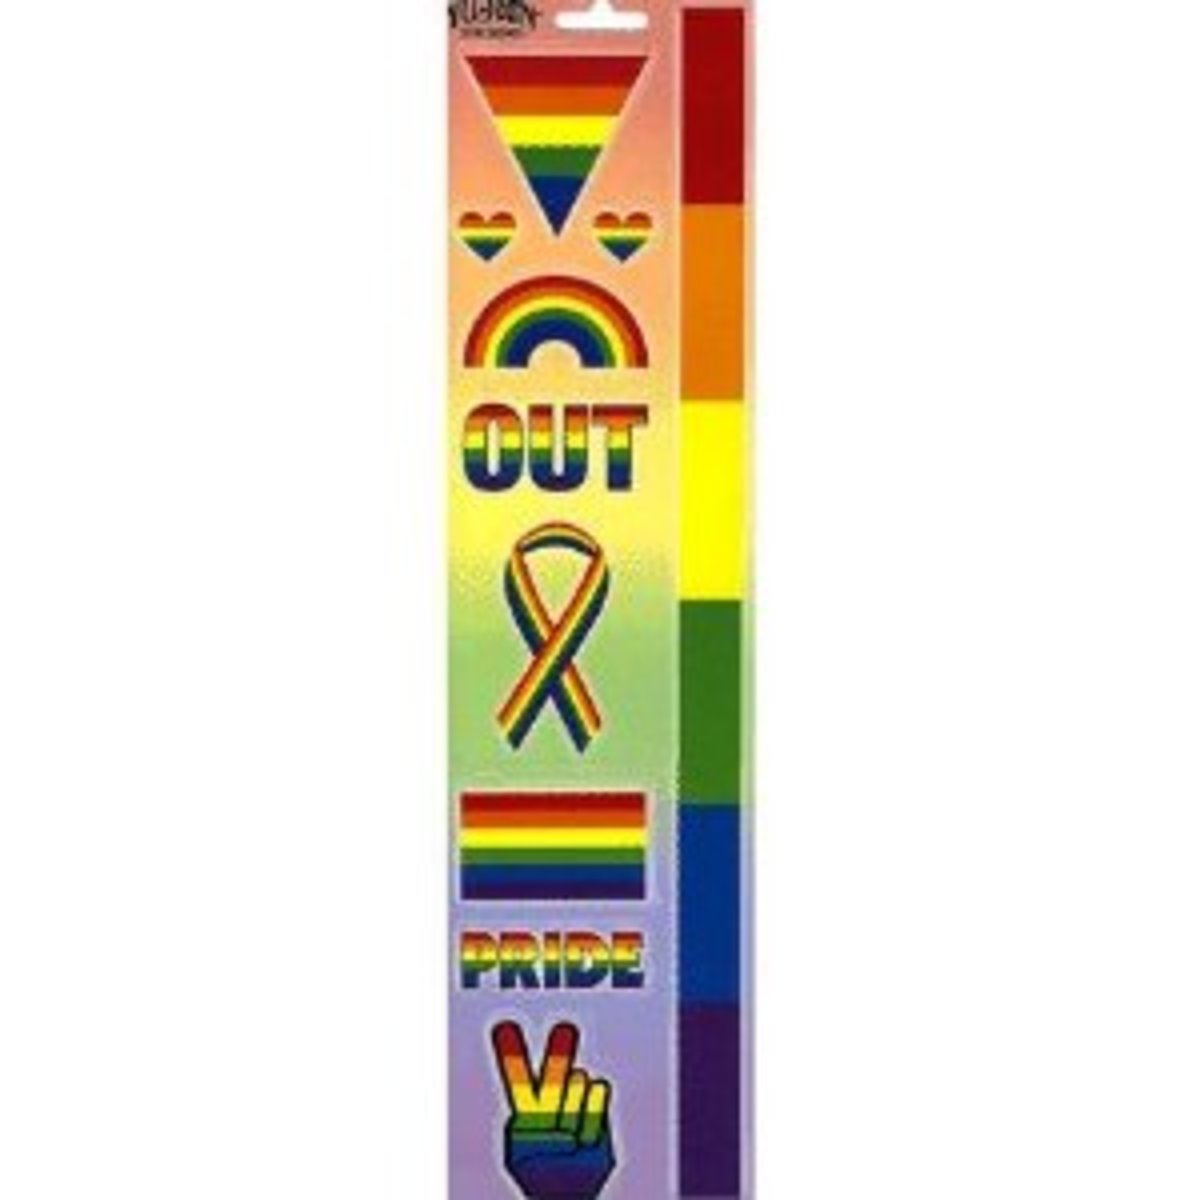 lgbt-pride-sticker-sets-pride-stickers-and-magnetic-signs-to-show-your-gay-pride